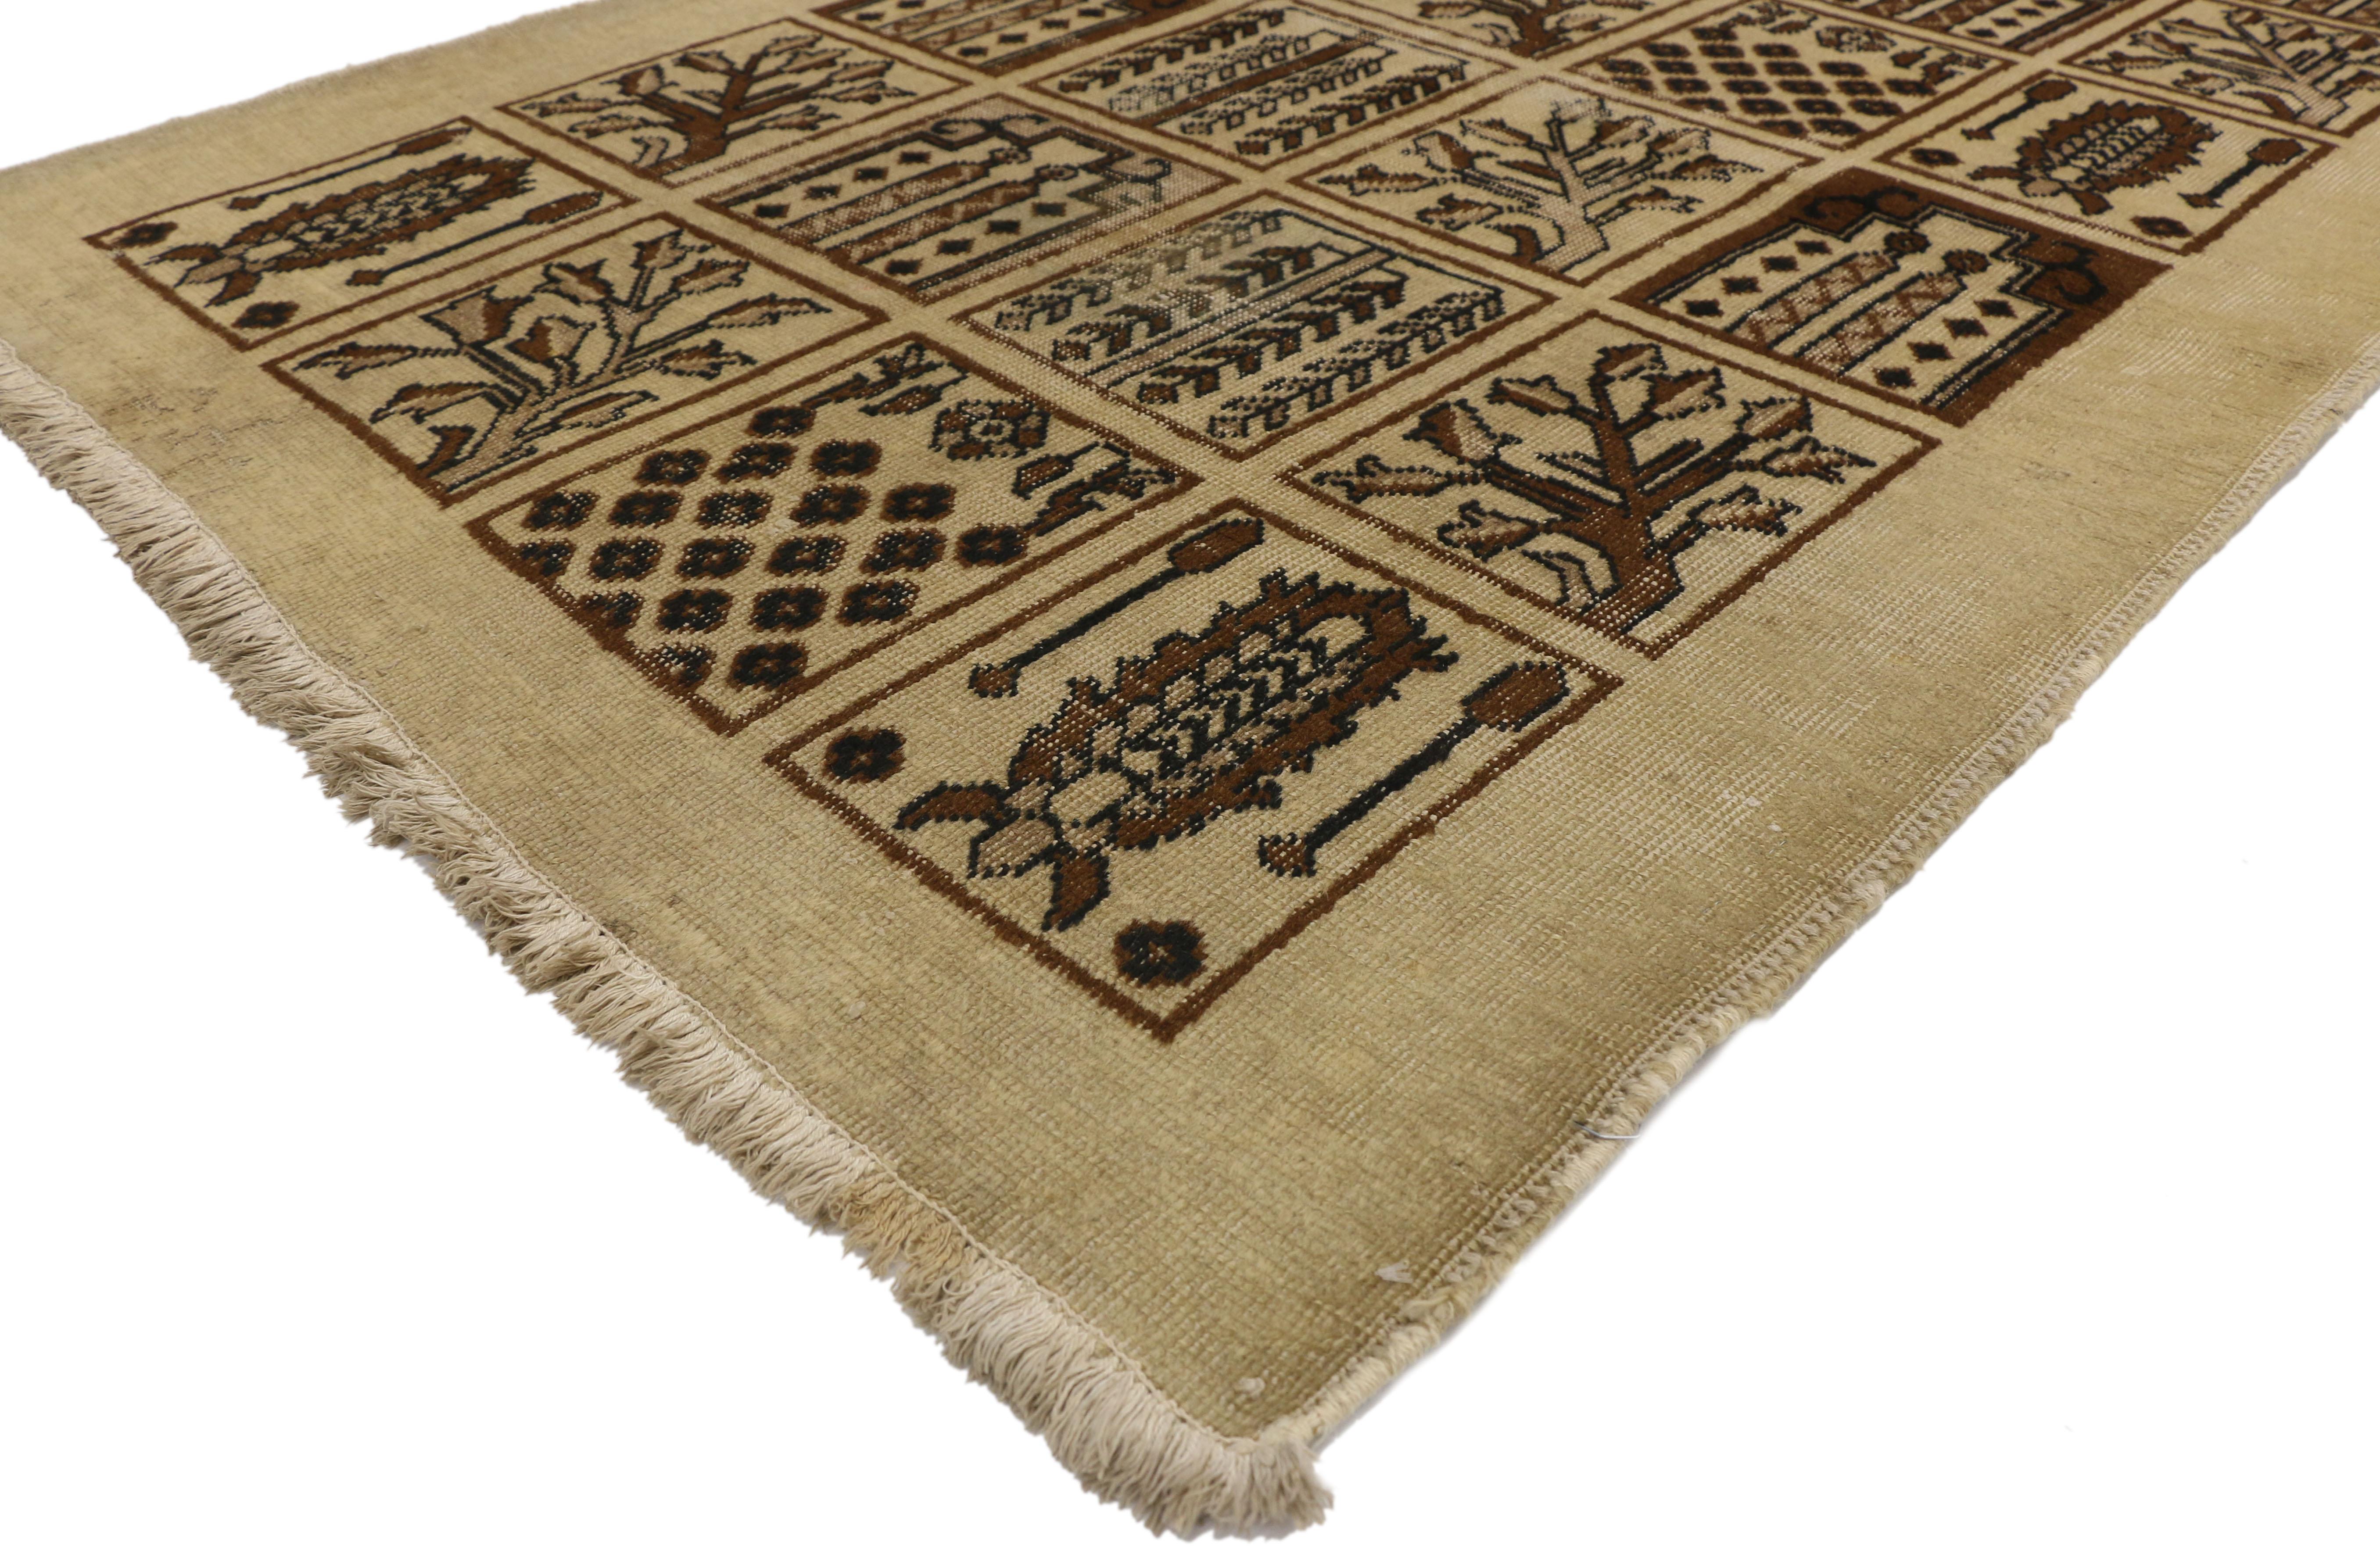 73299, distressed vintage Persian Bakhtiari rug with garden design and Black Forest style. A beautiful, unique garden design is on display in this distressed vintage Bakhtiari Persian rug. Each individual square compartment is 